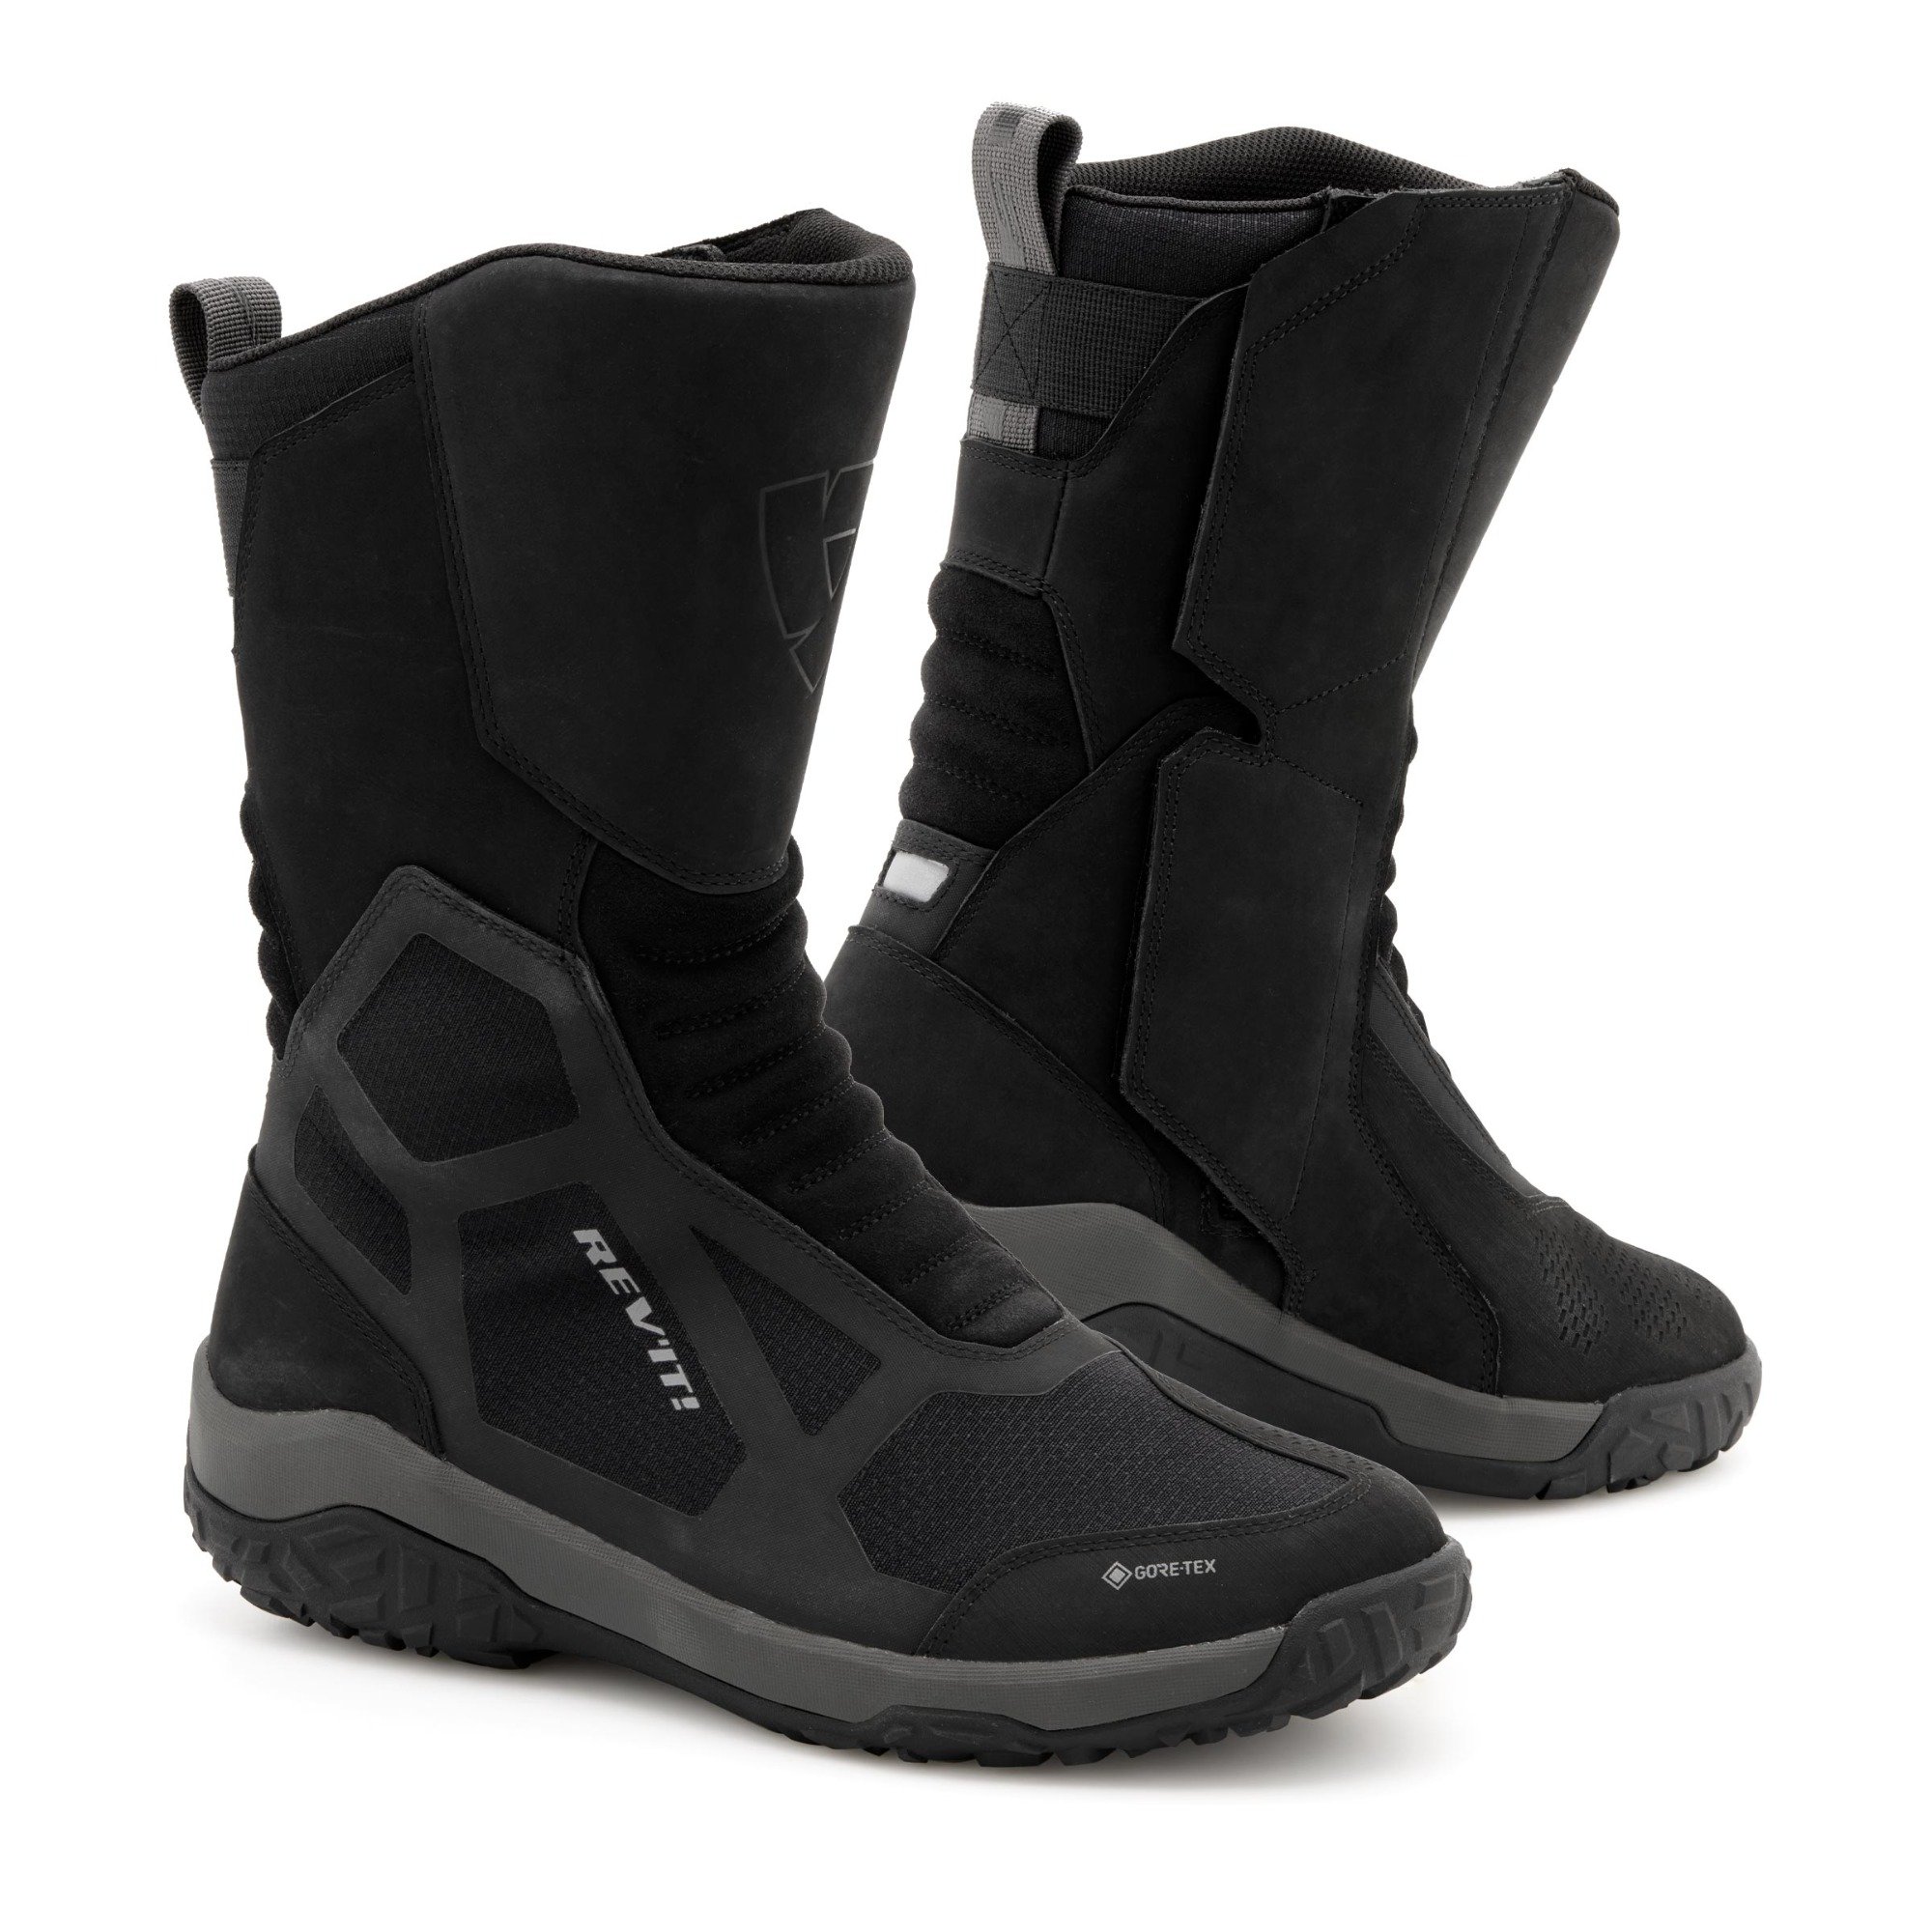 Image of REV'IT! Everest GTX Boots Black Size 45 ID 8700001328562